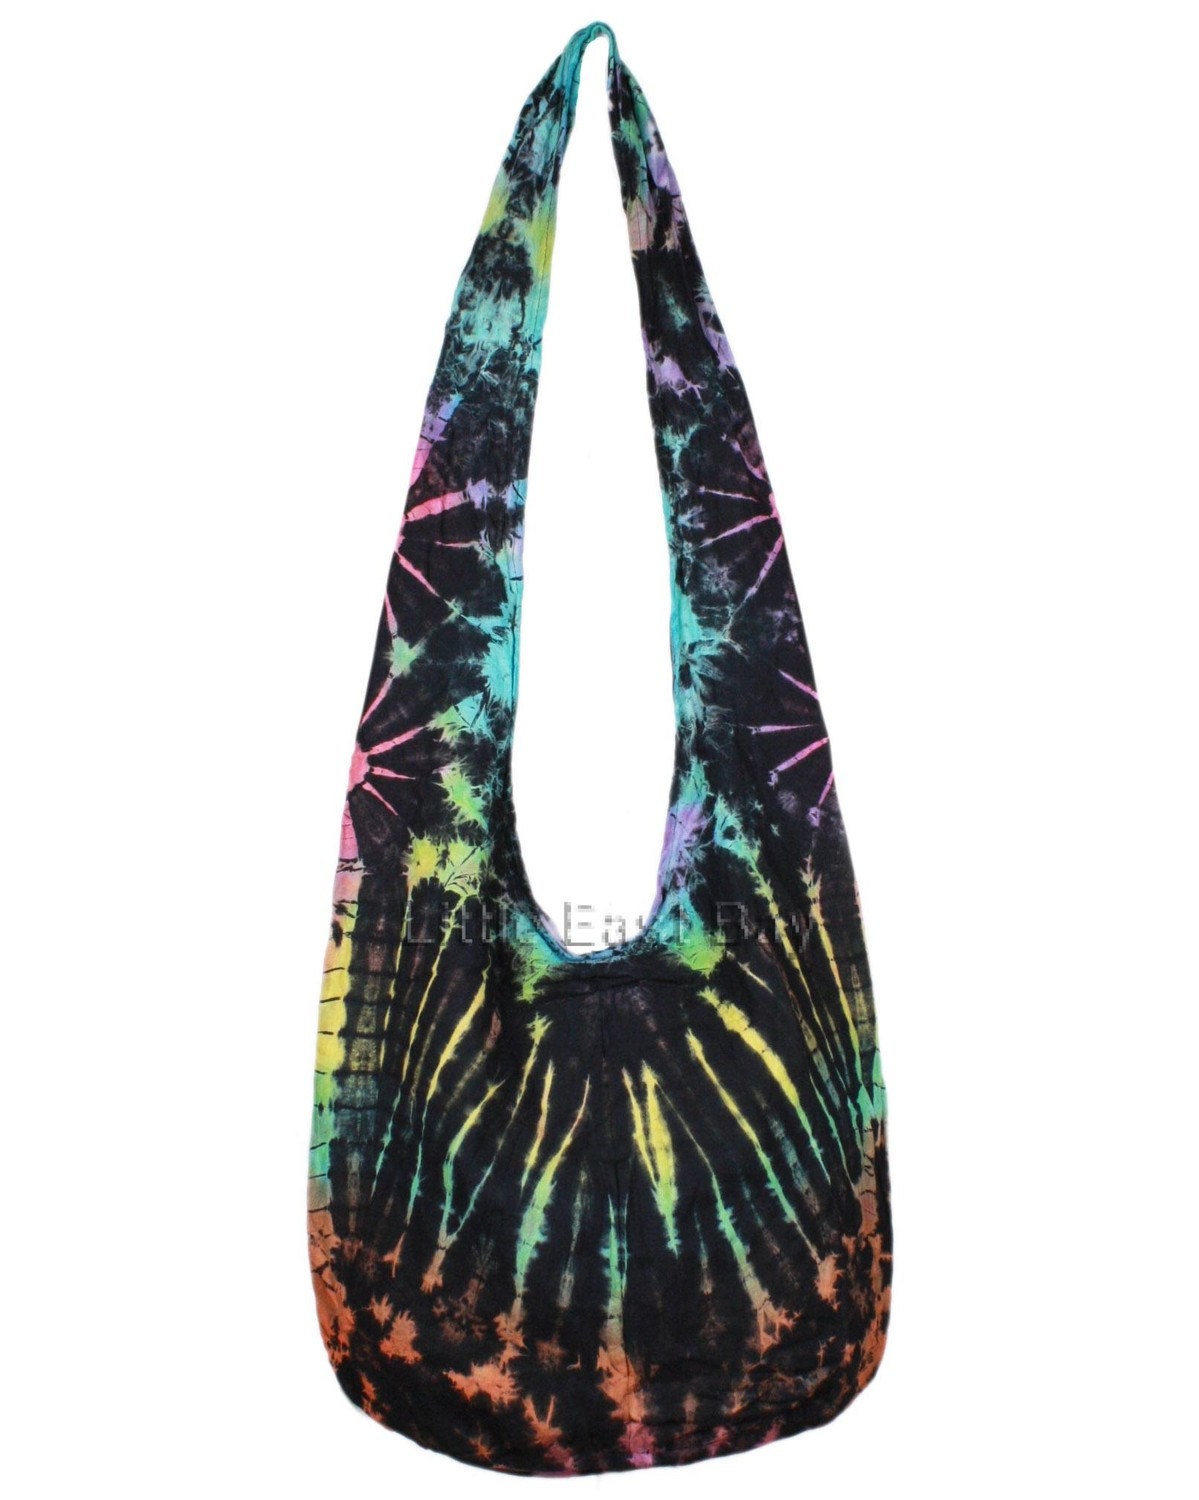 Hippie Hobo Tie Dye Sling Crossbody Bag Purse M1 .. ART TO Carry with ...